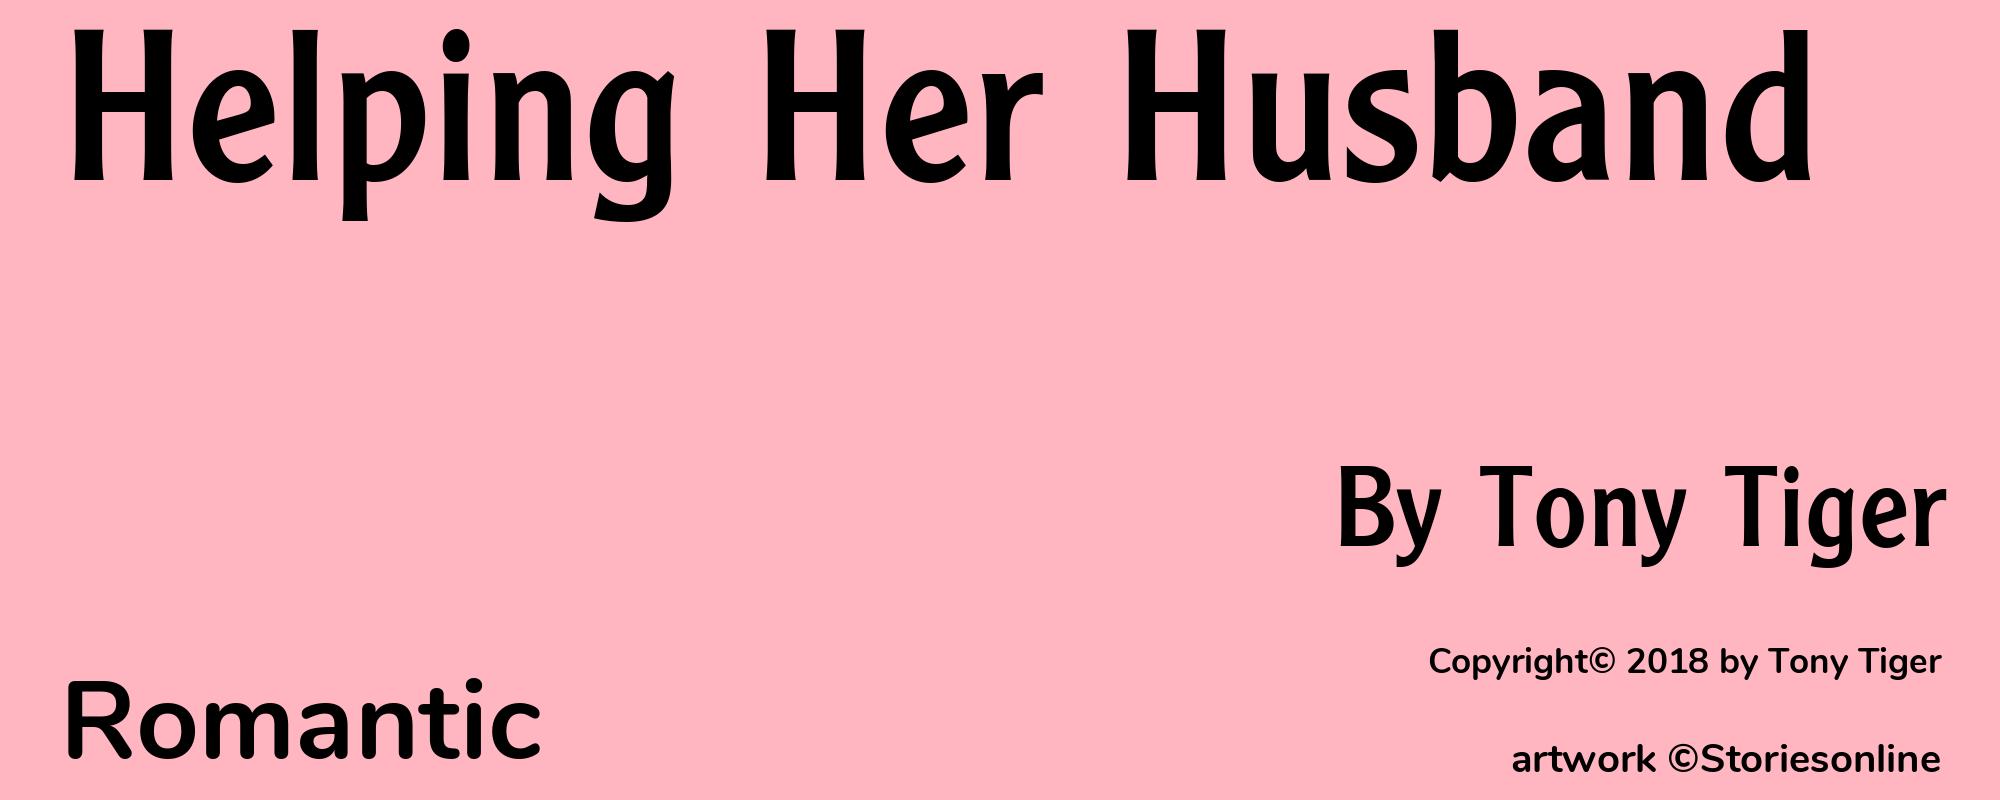 Helping Her Husband - Cover